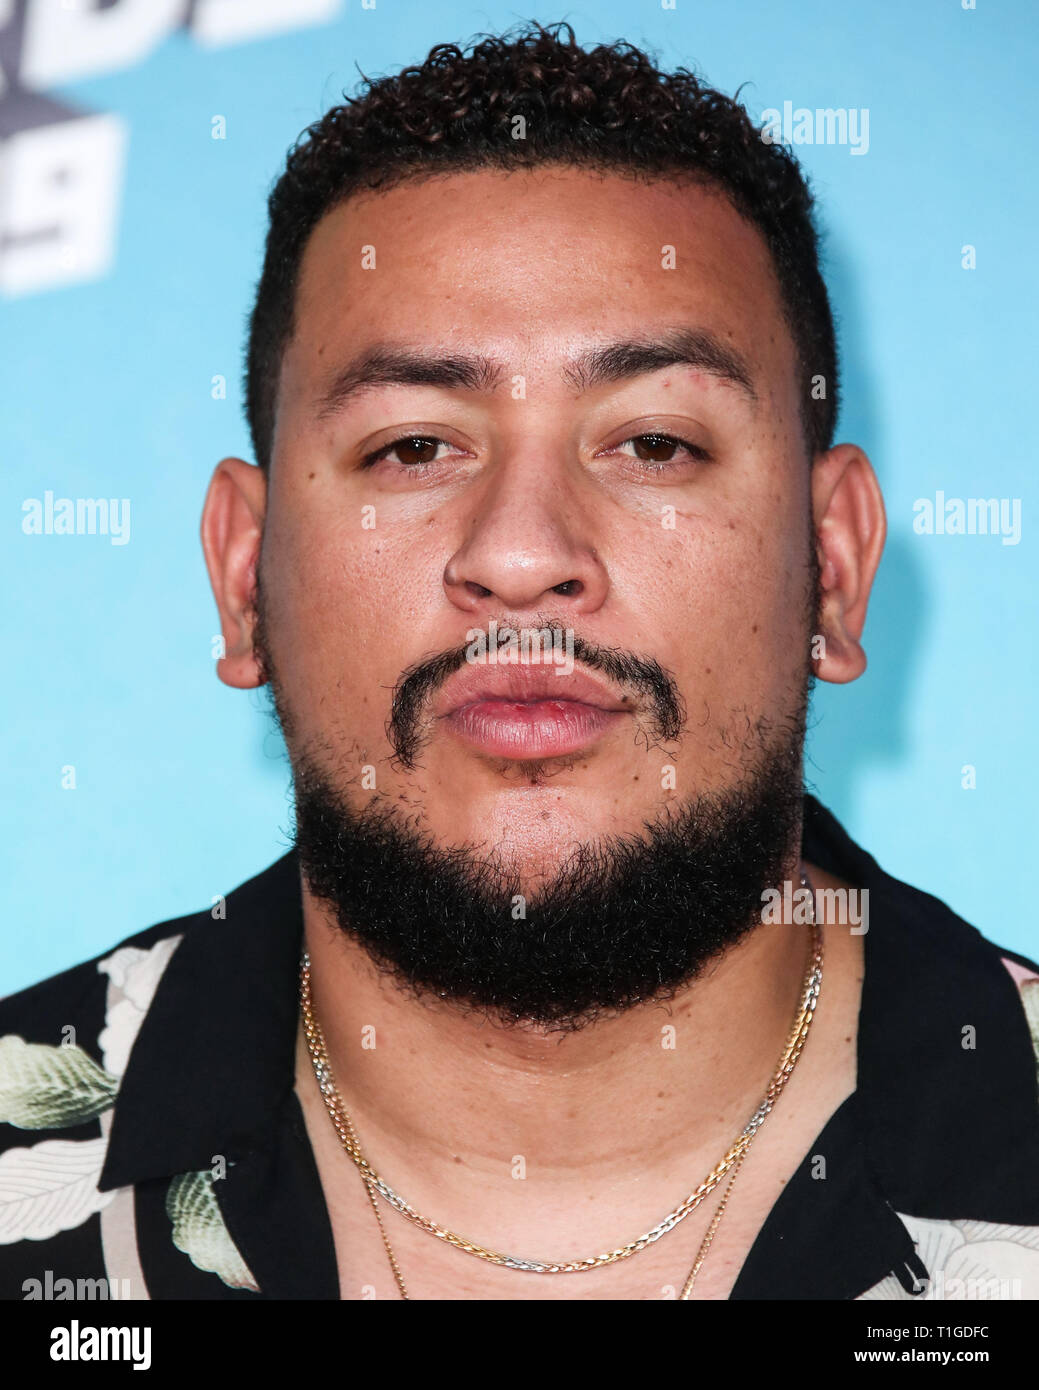 LOS ANGELES, CA, USA - MARCH 23: AKA arrives at Nickelodeon's 2019 Kids' Choice Awards held at the USC Galen Center on March 23, 2019 in Los Angeles, California, United States. (Photo by Xavier Collin/Image Press Agency) Stock Photo